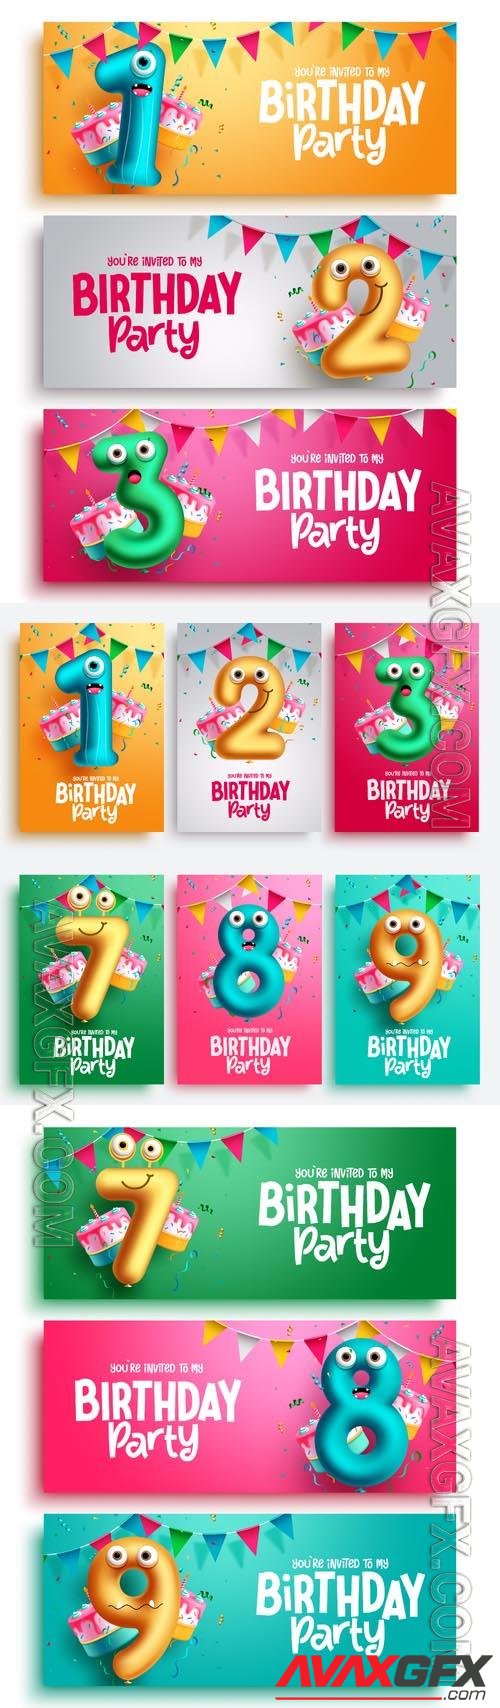 Birthday party vector set design, character balloons in number balloon collection